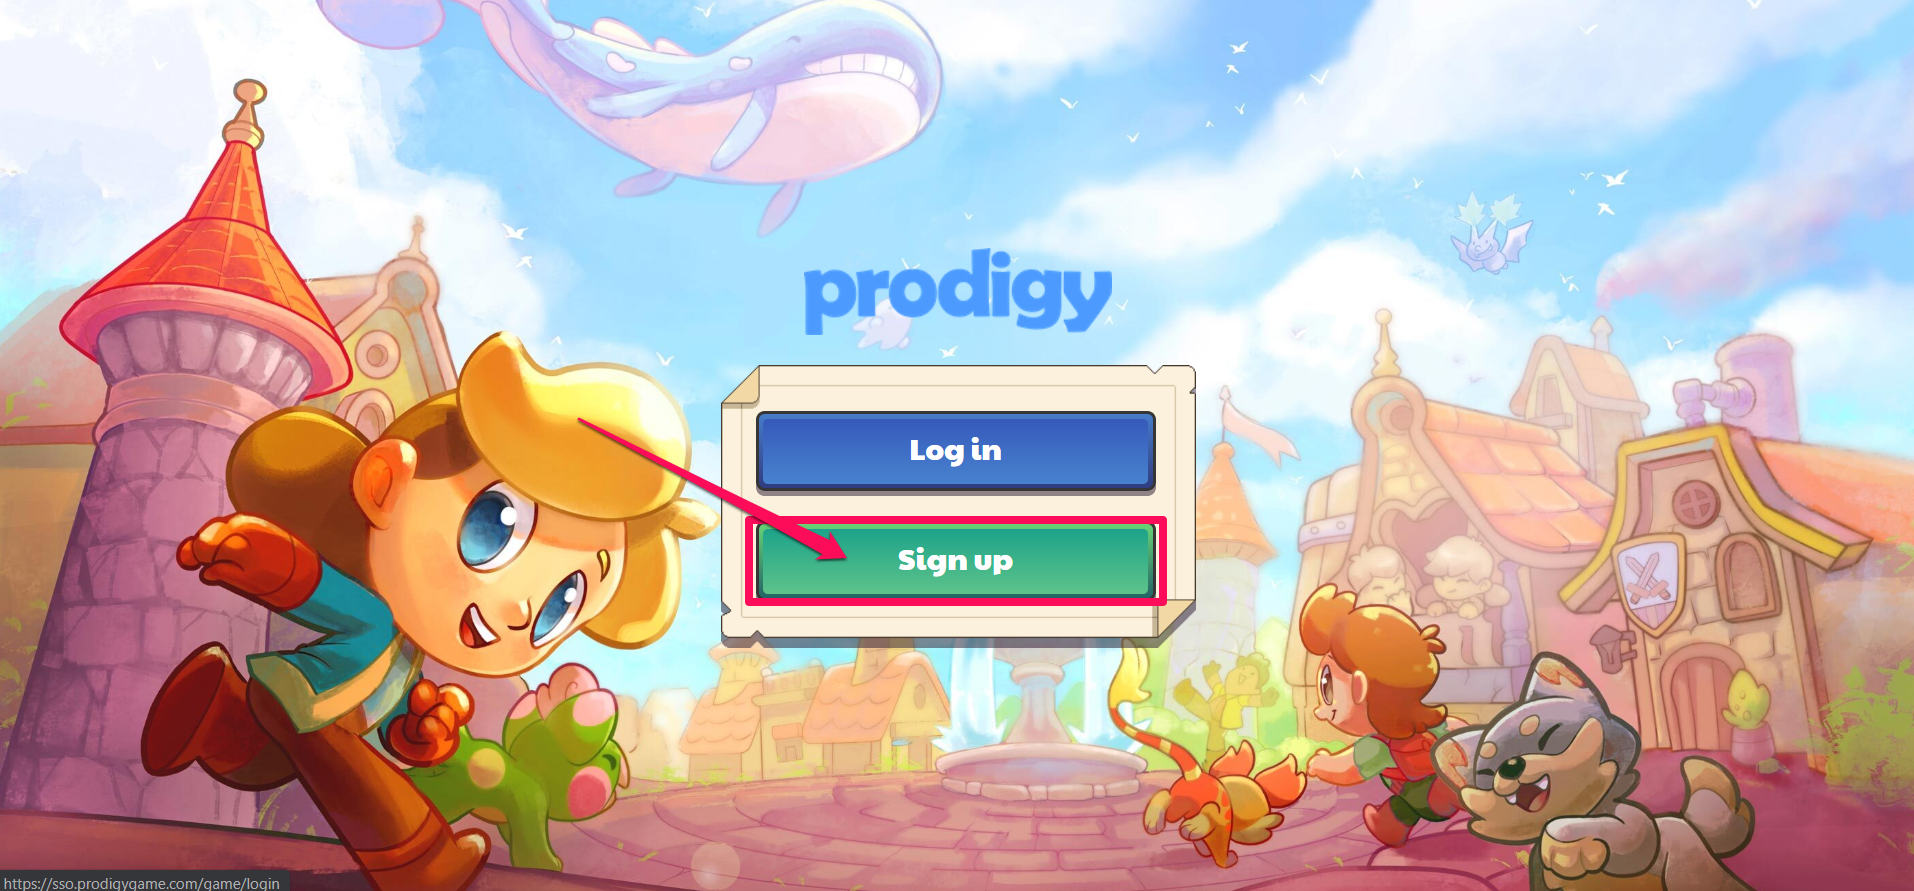 how to get free membership on prodigy 2018